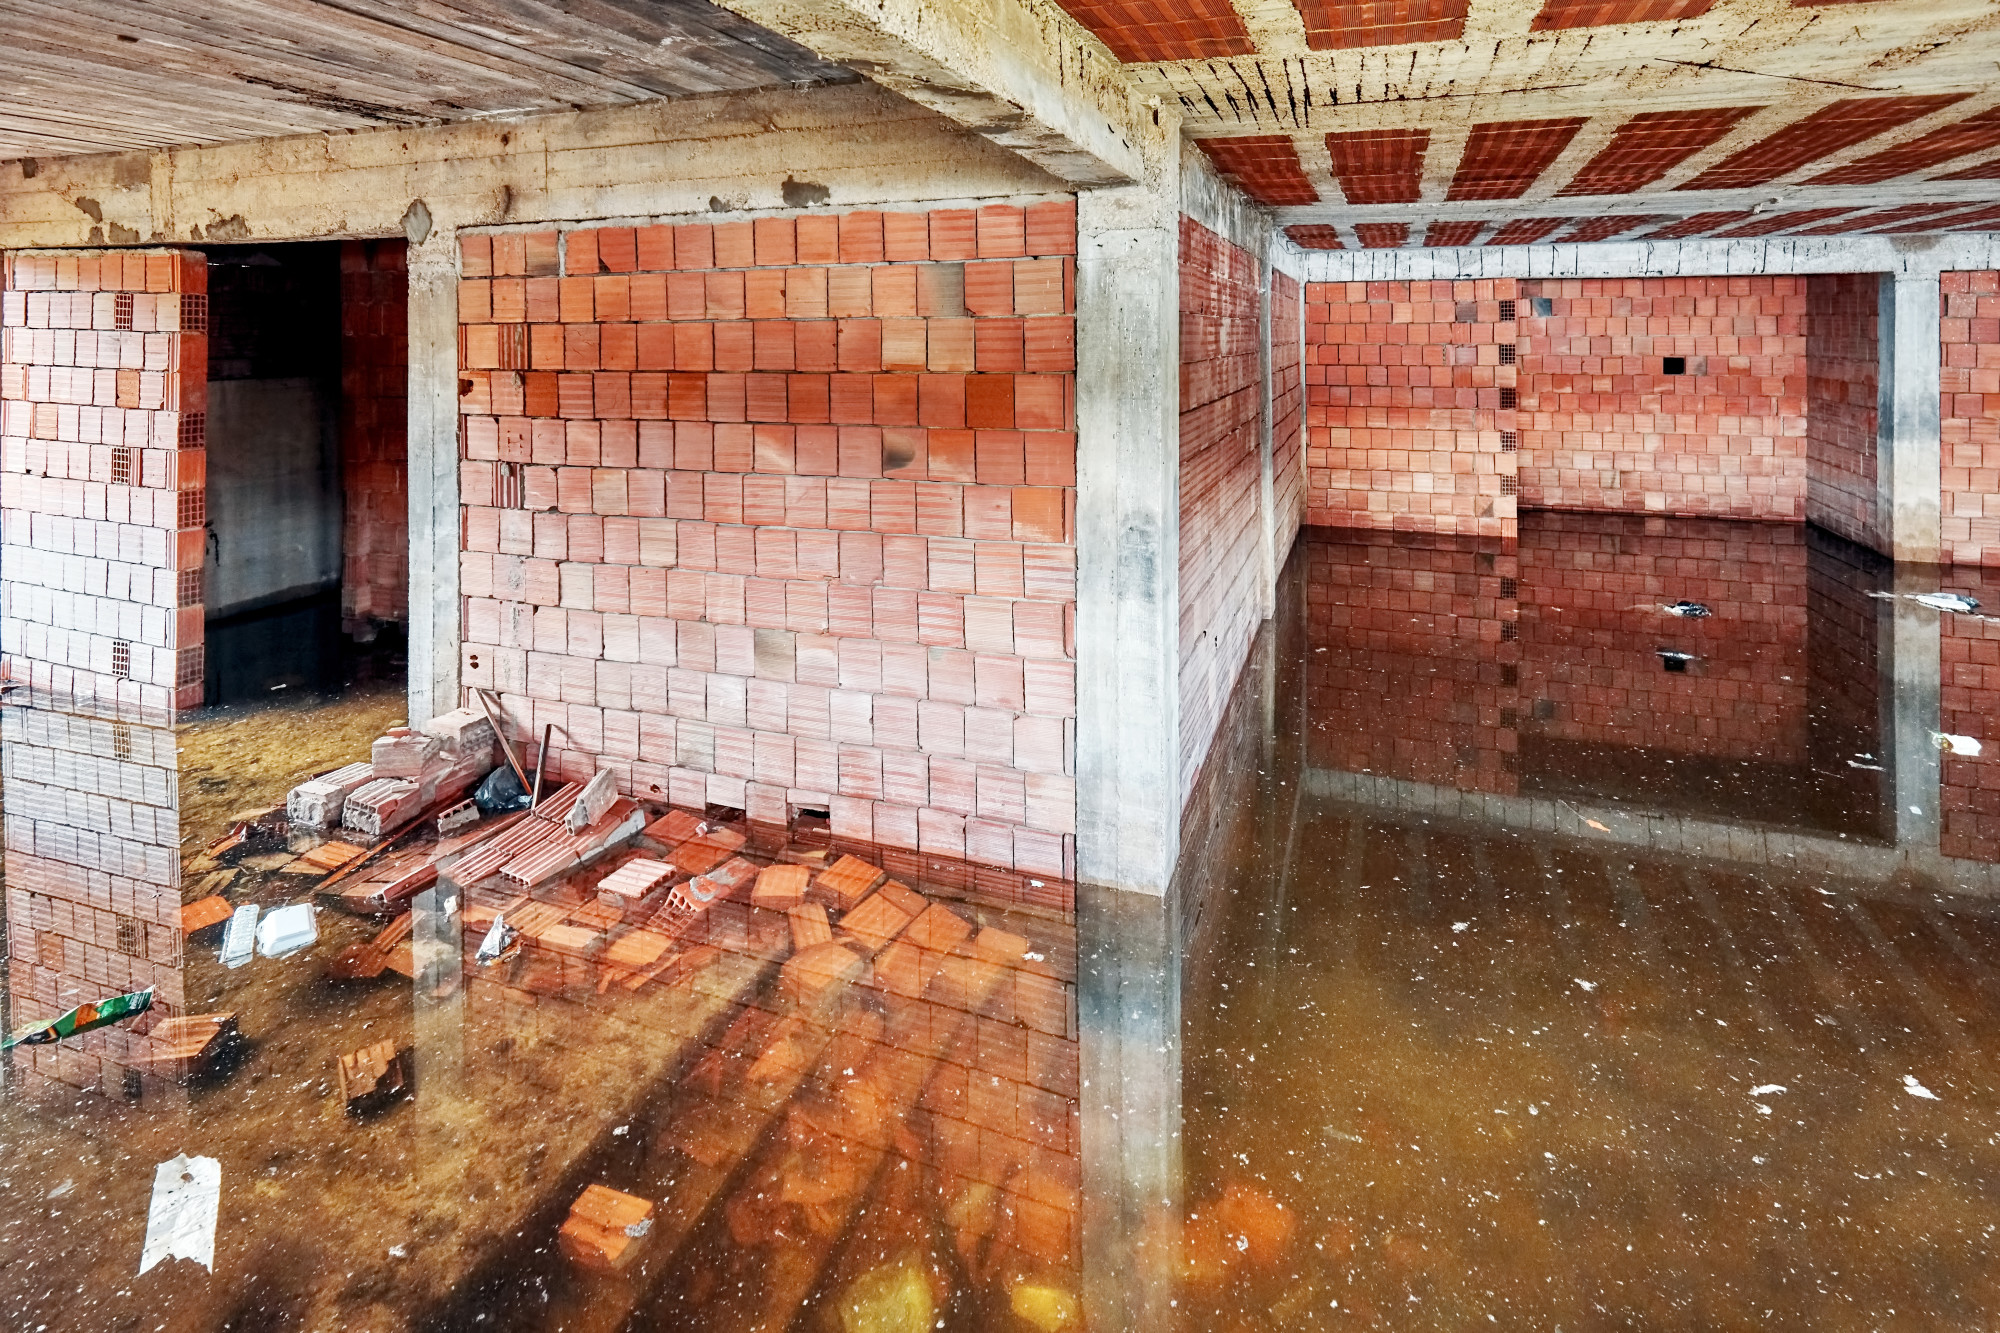 How to Prevent a Flooded Basement During a Rainy Season